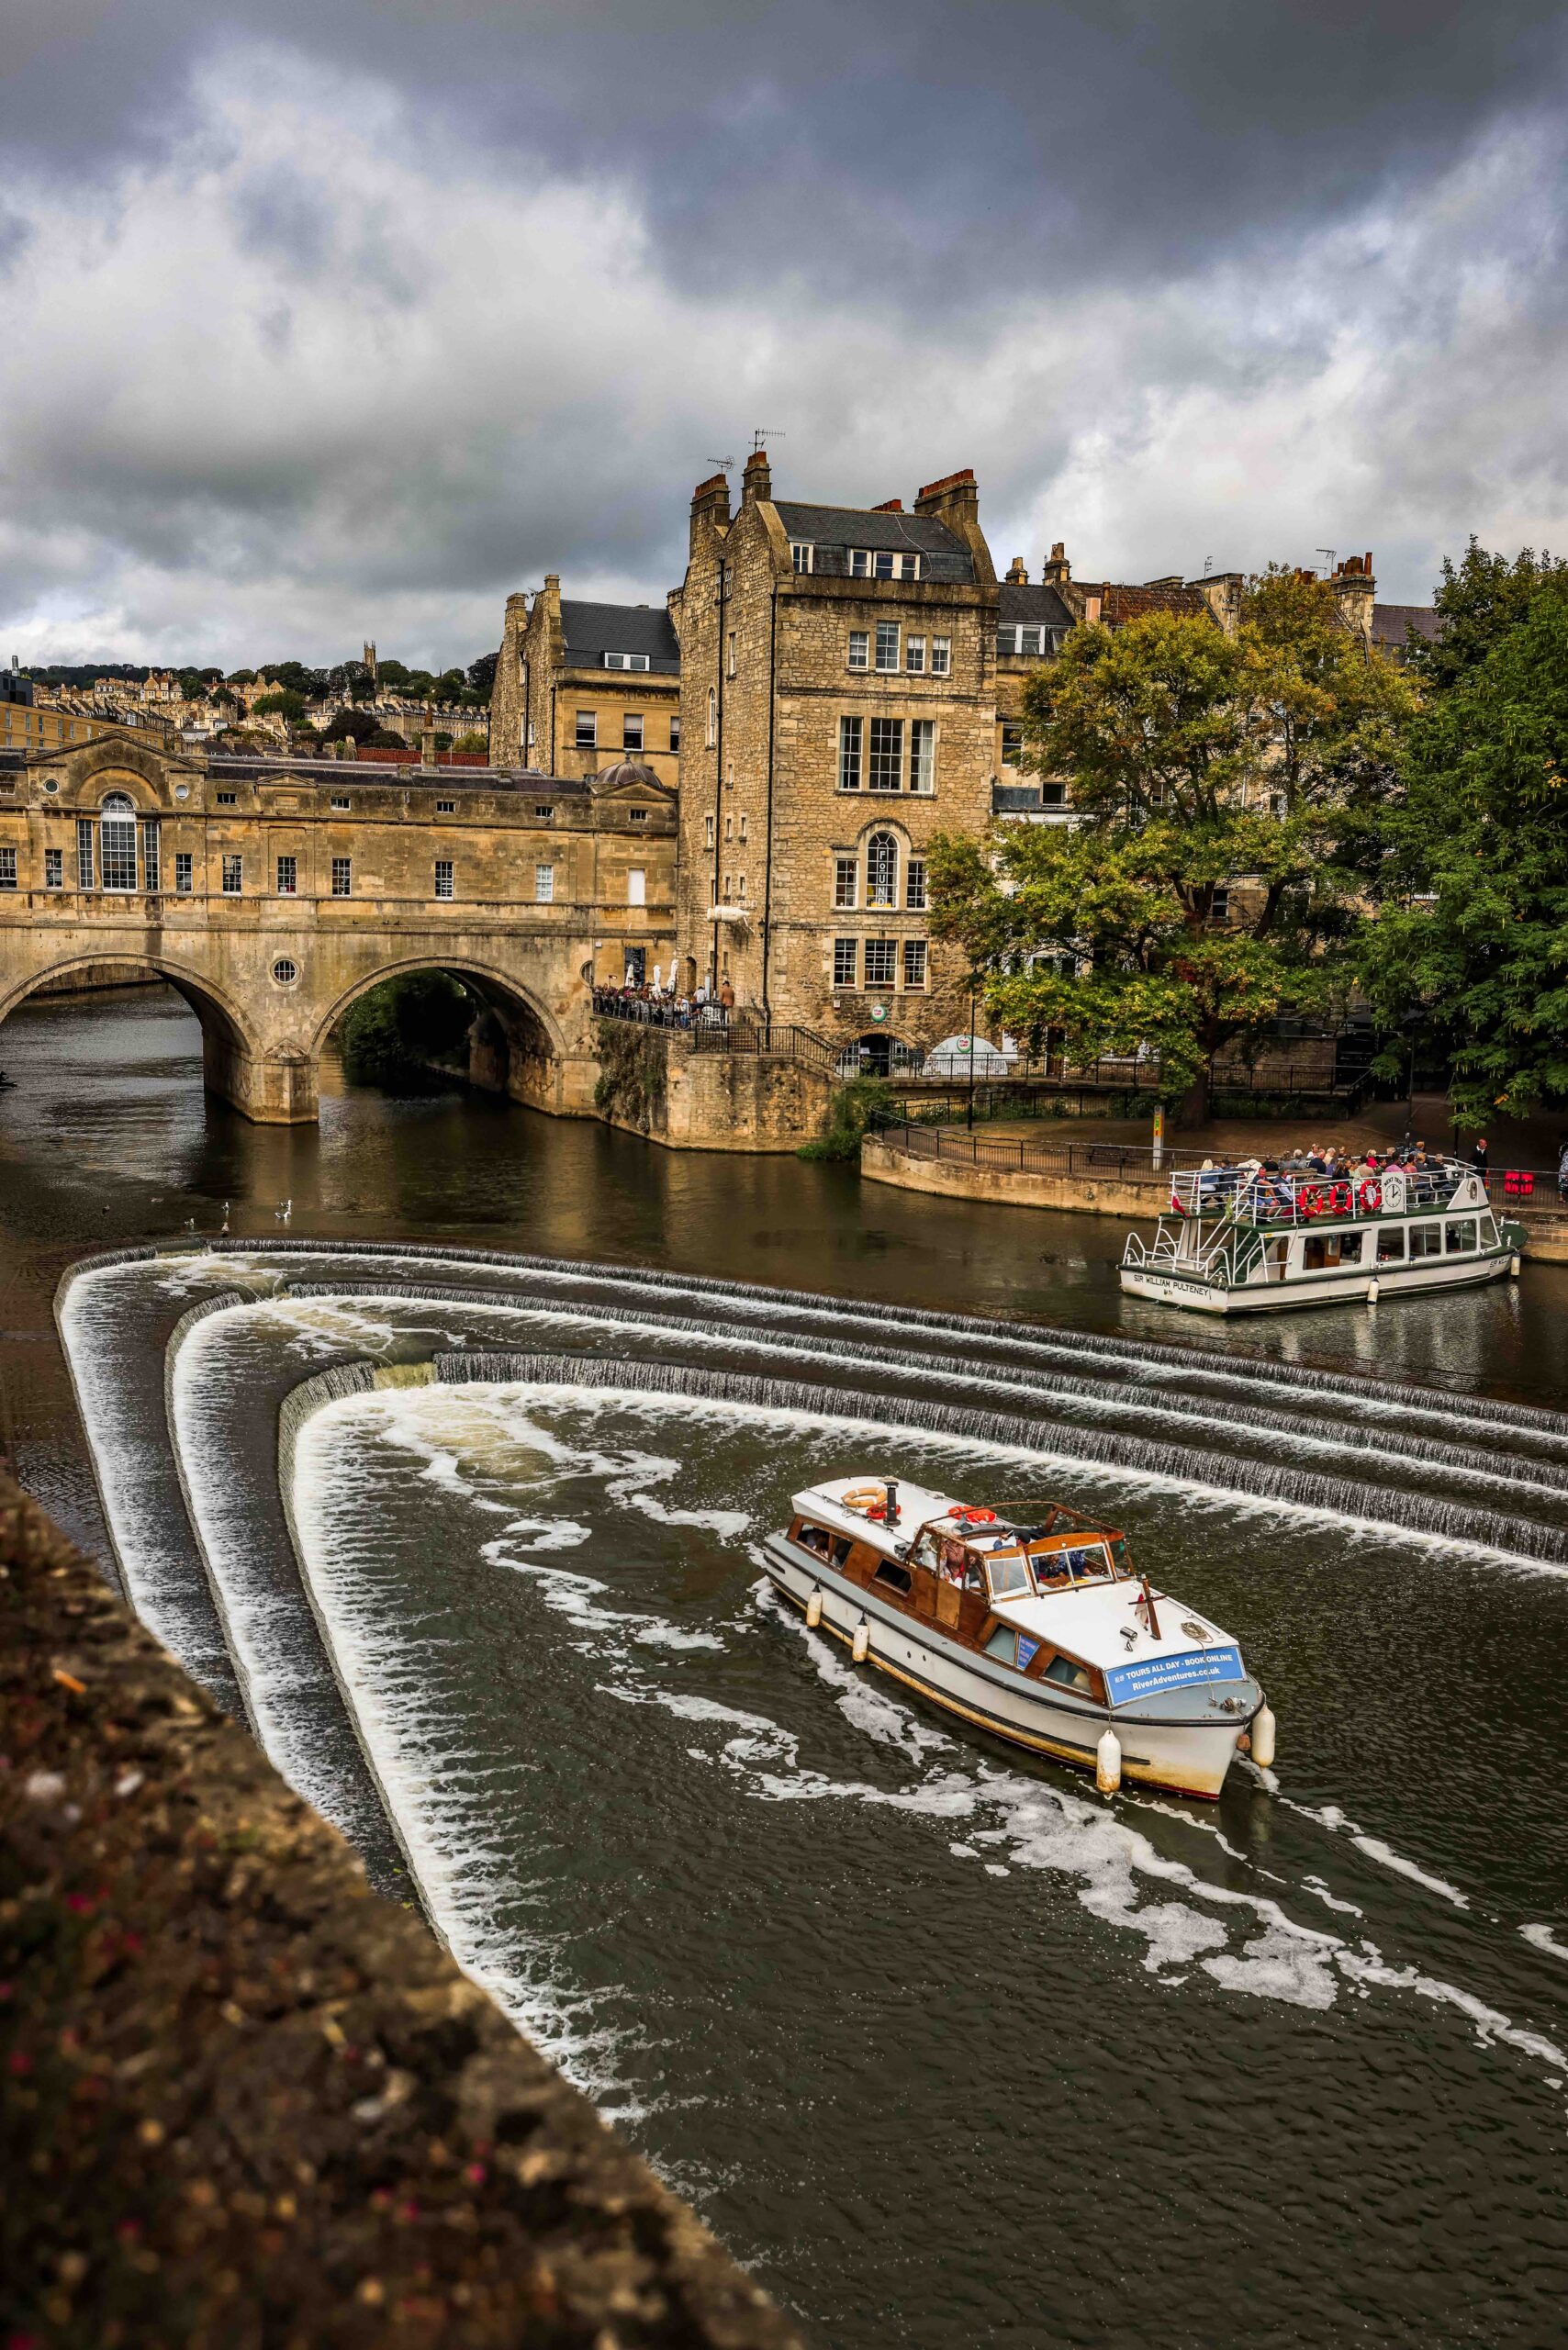 A boat is sitting on the river underneath Pultney Bridge in Bath